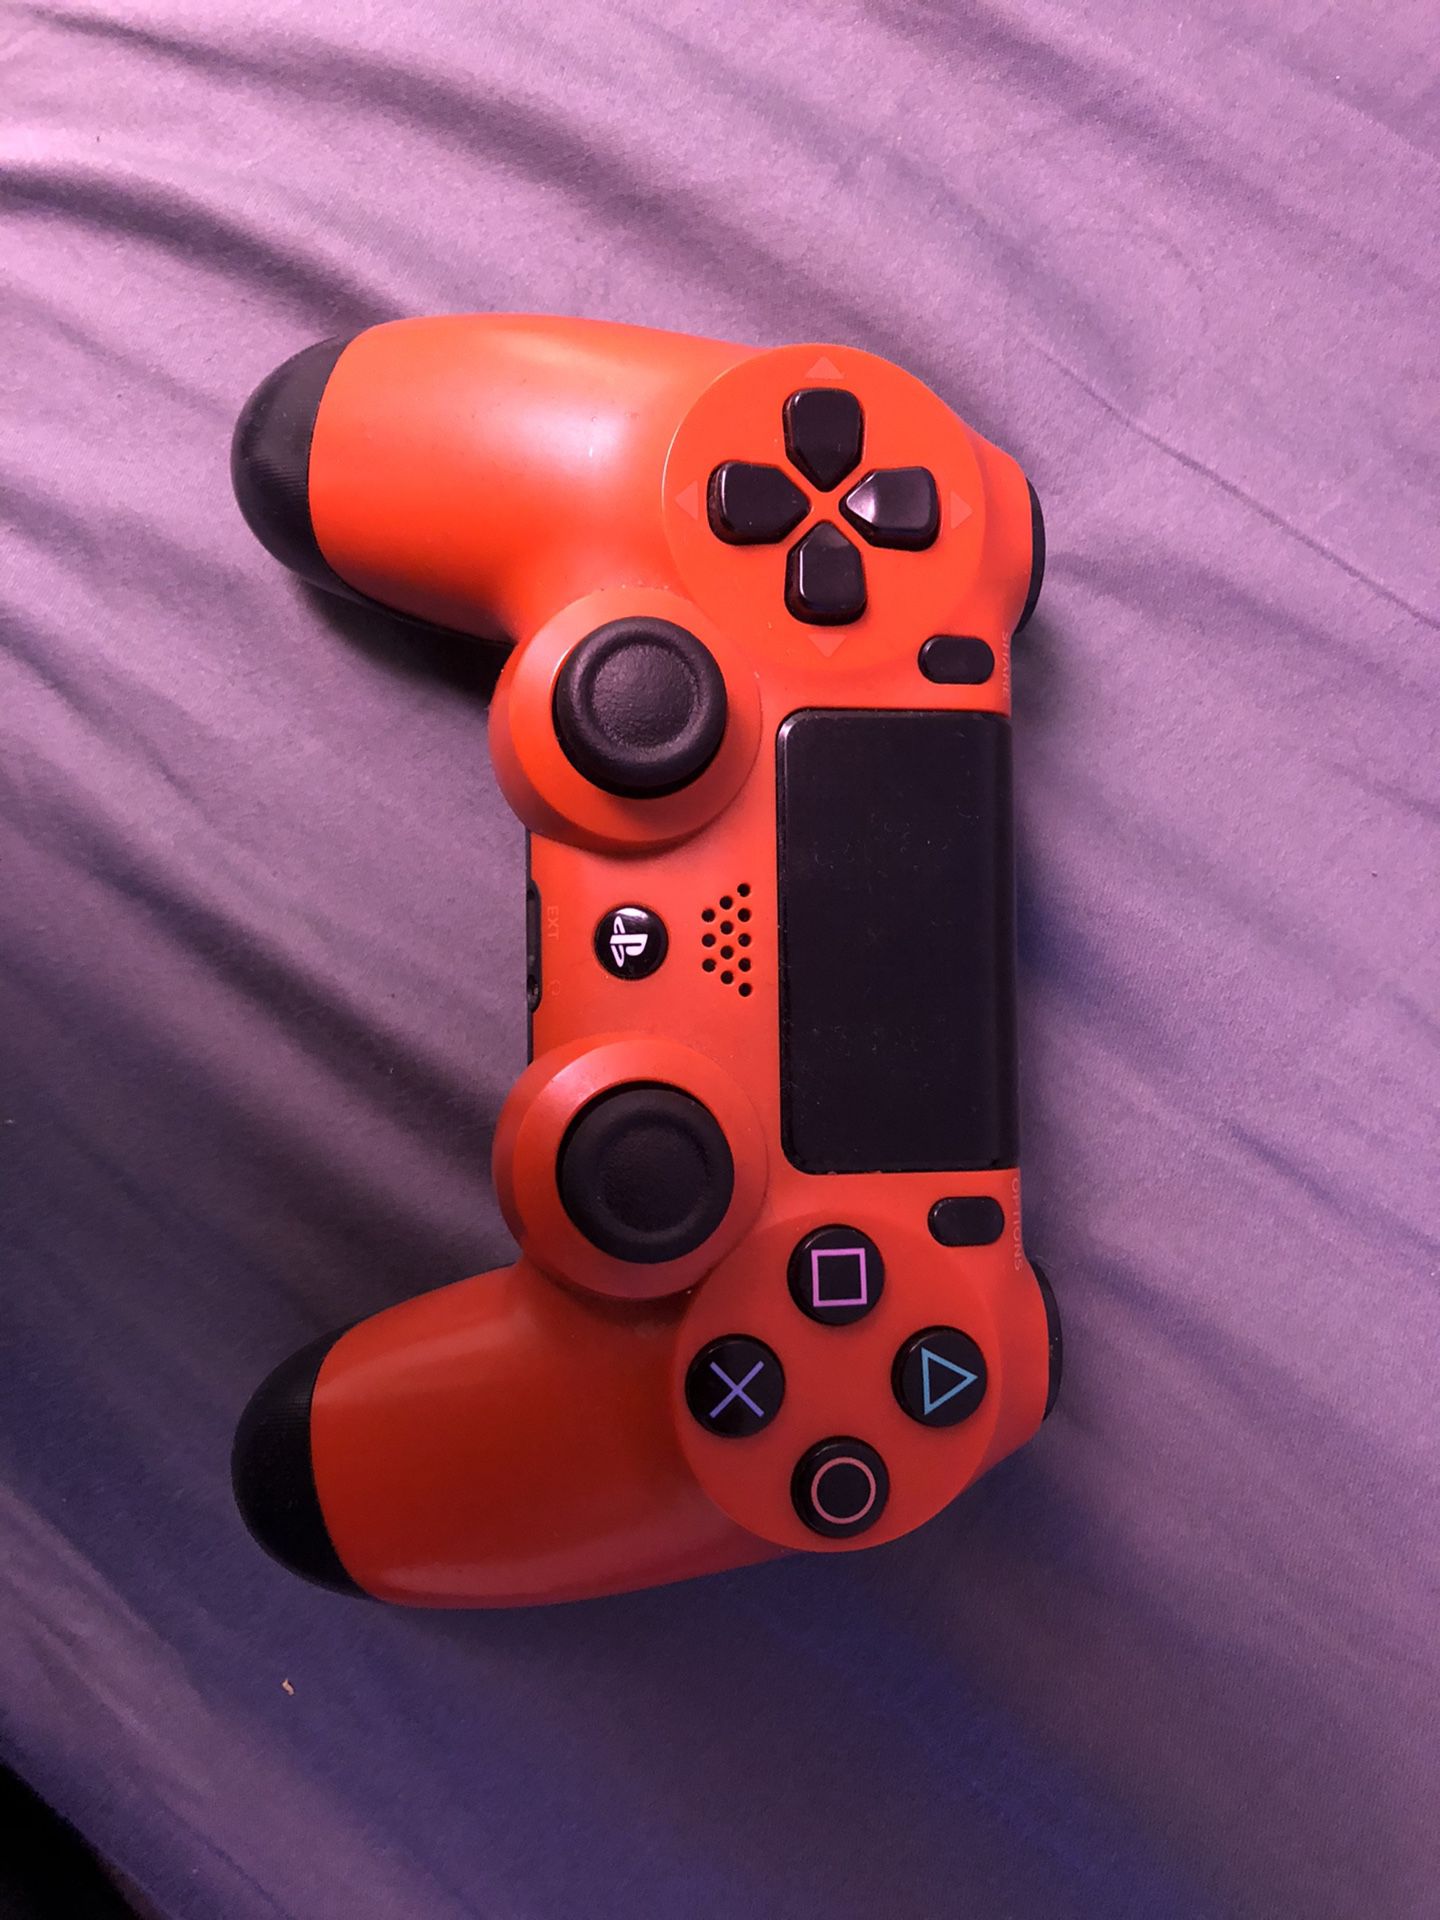 Brand new red controller for playstation 4